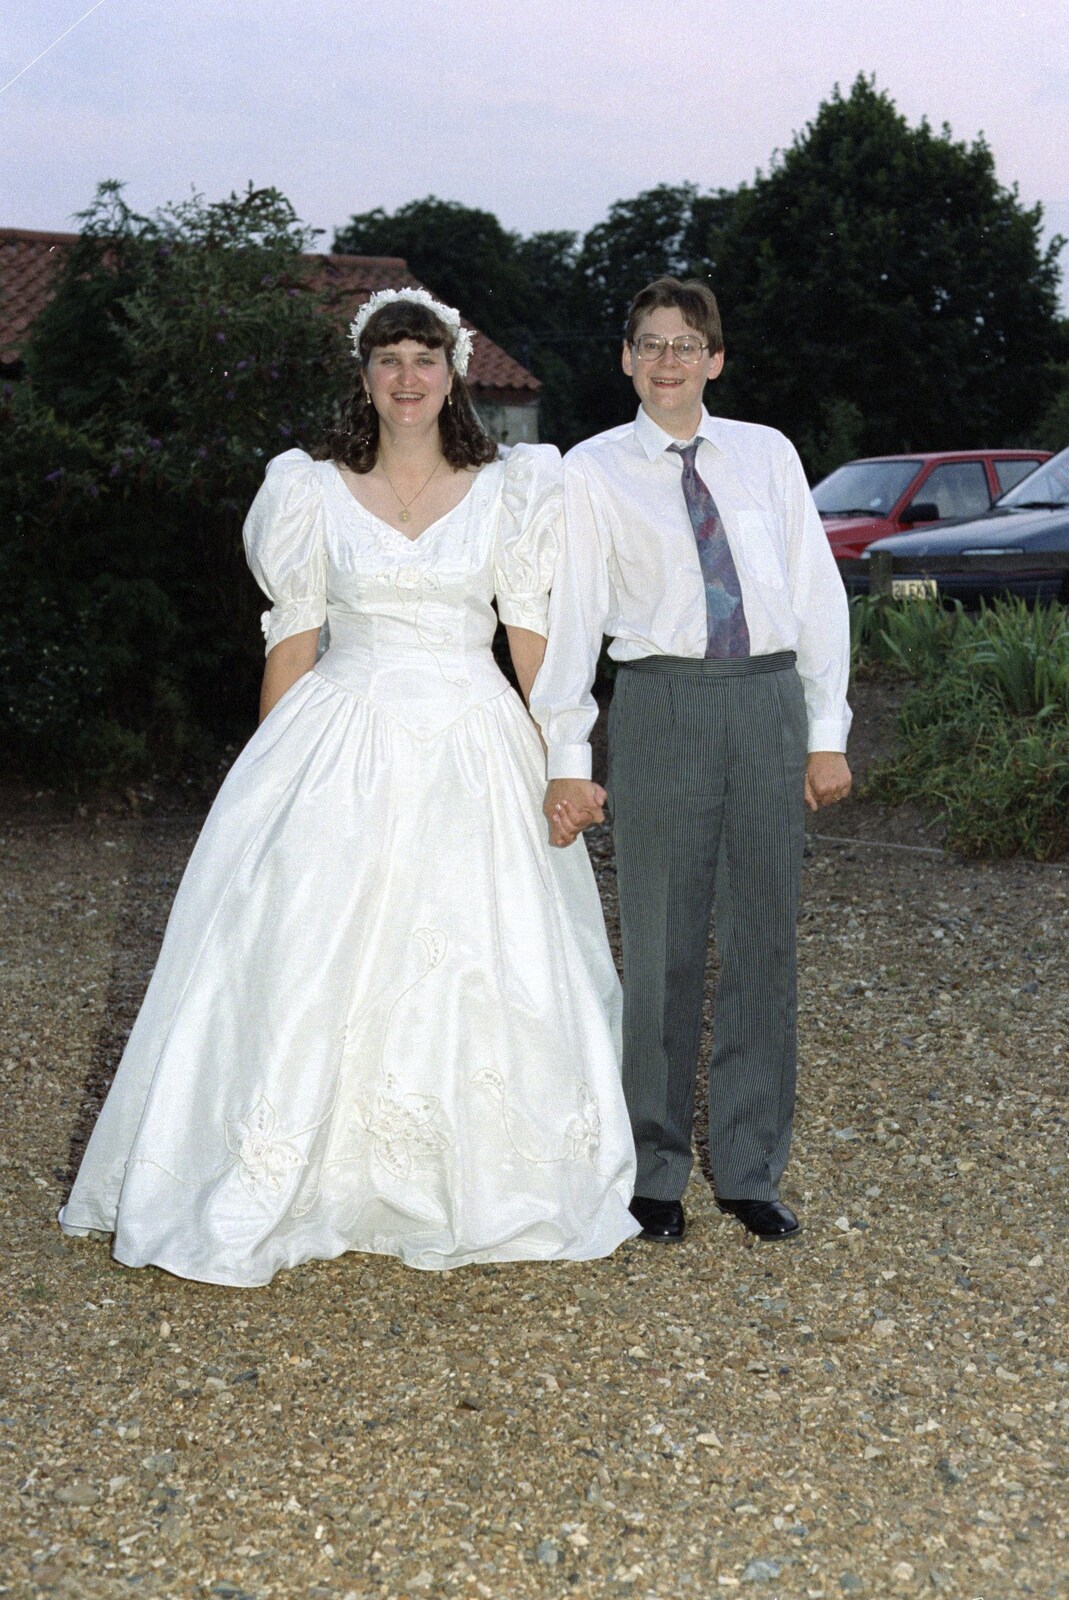 Jane and Tony from Tone's Wedding, Mundford, Norfolk - 27th August 1994